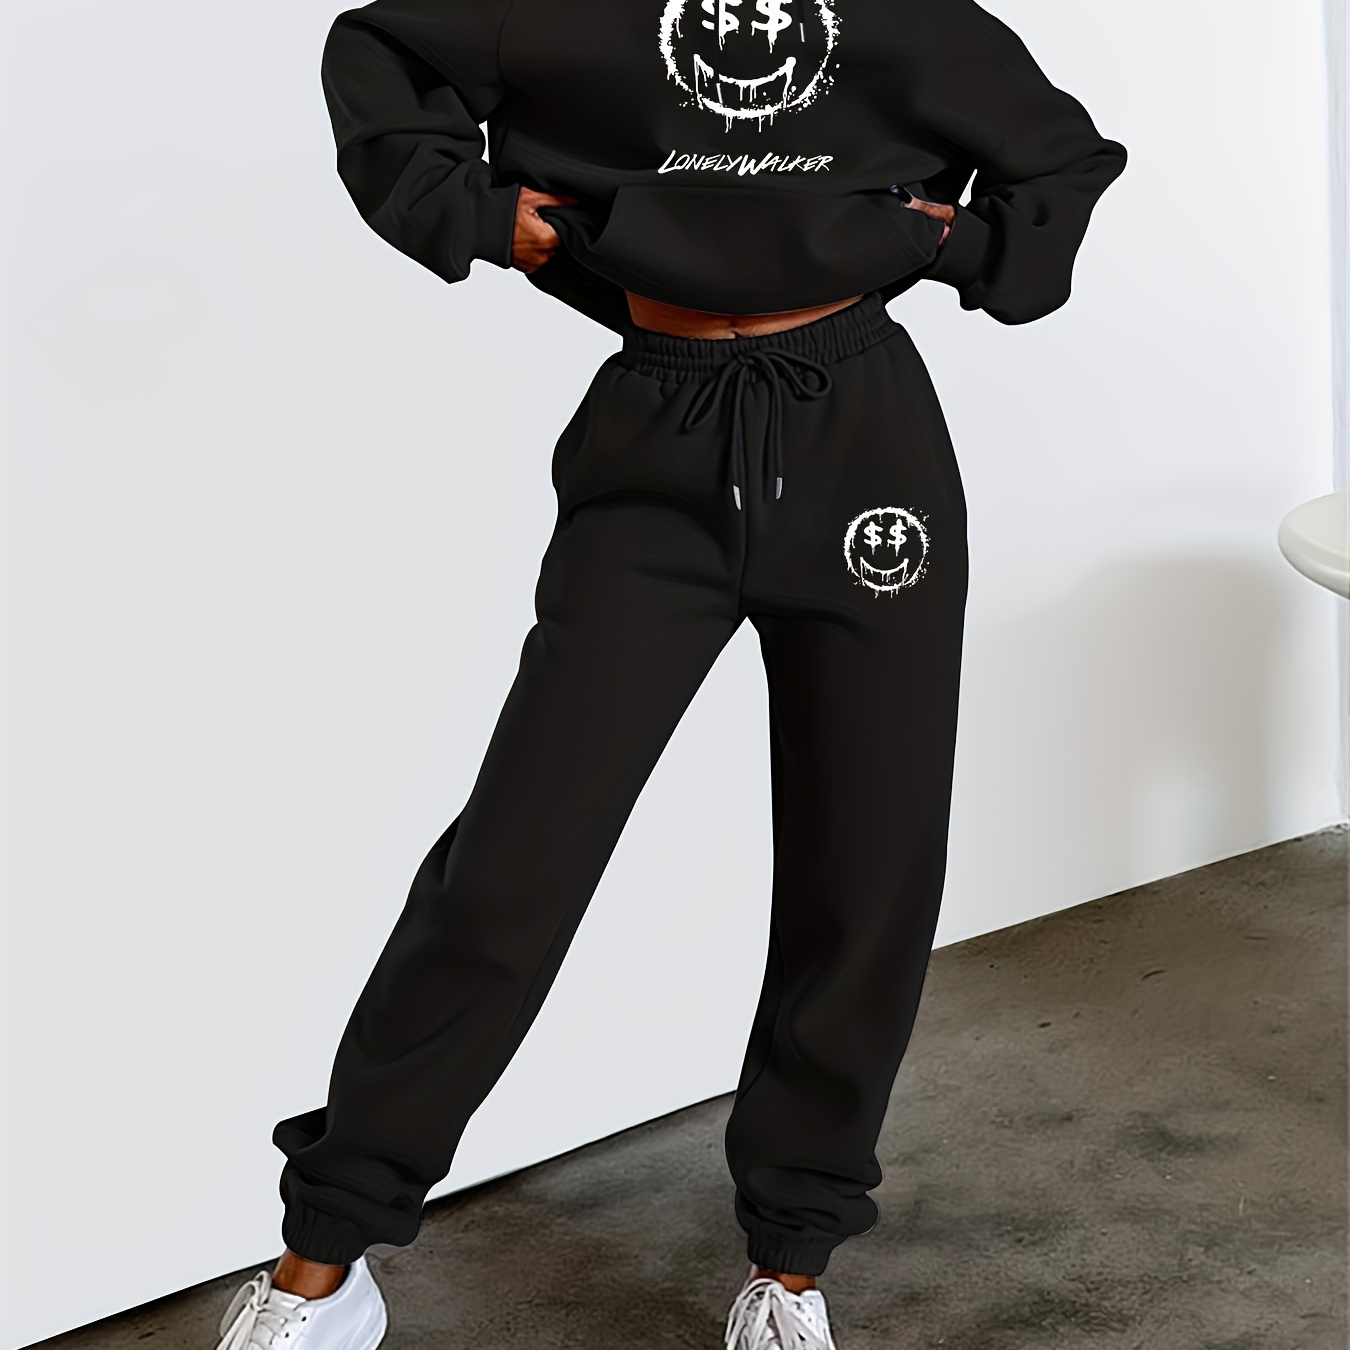 

2pcs Expression & Letter Print Casual Sports Set, Long Sleeves Drawstring Hooded Sweatshirt & Elastic Waist Jogger Pant Sporty Suit, Women's Activewear